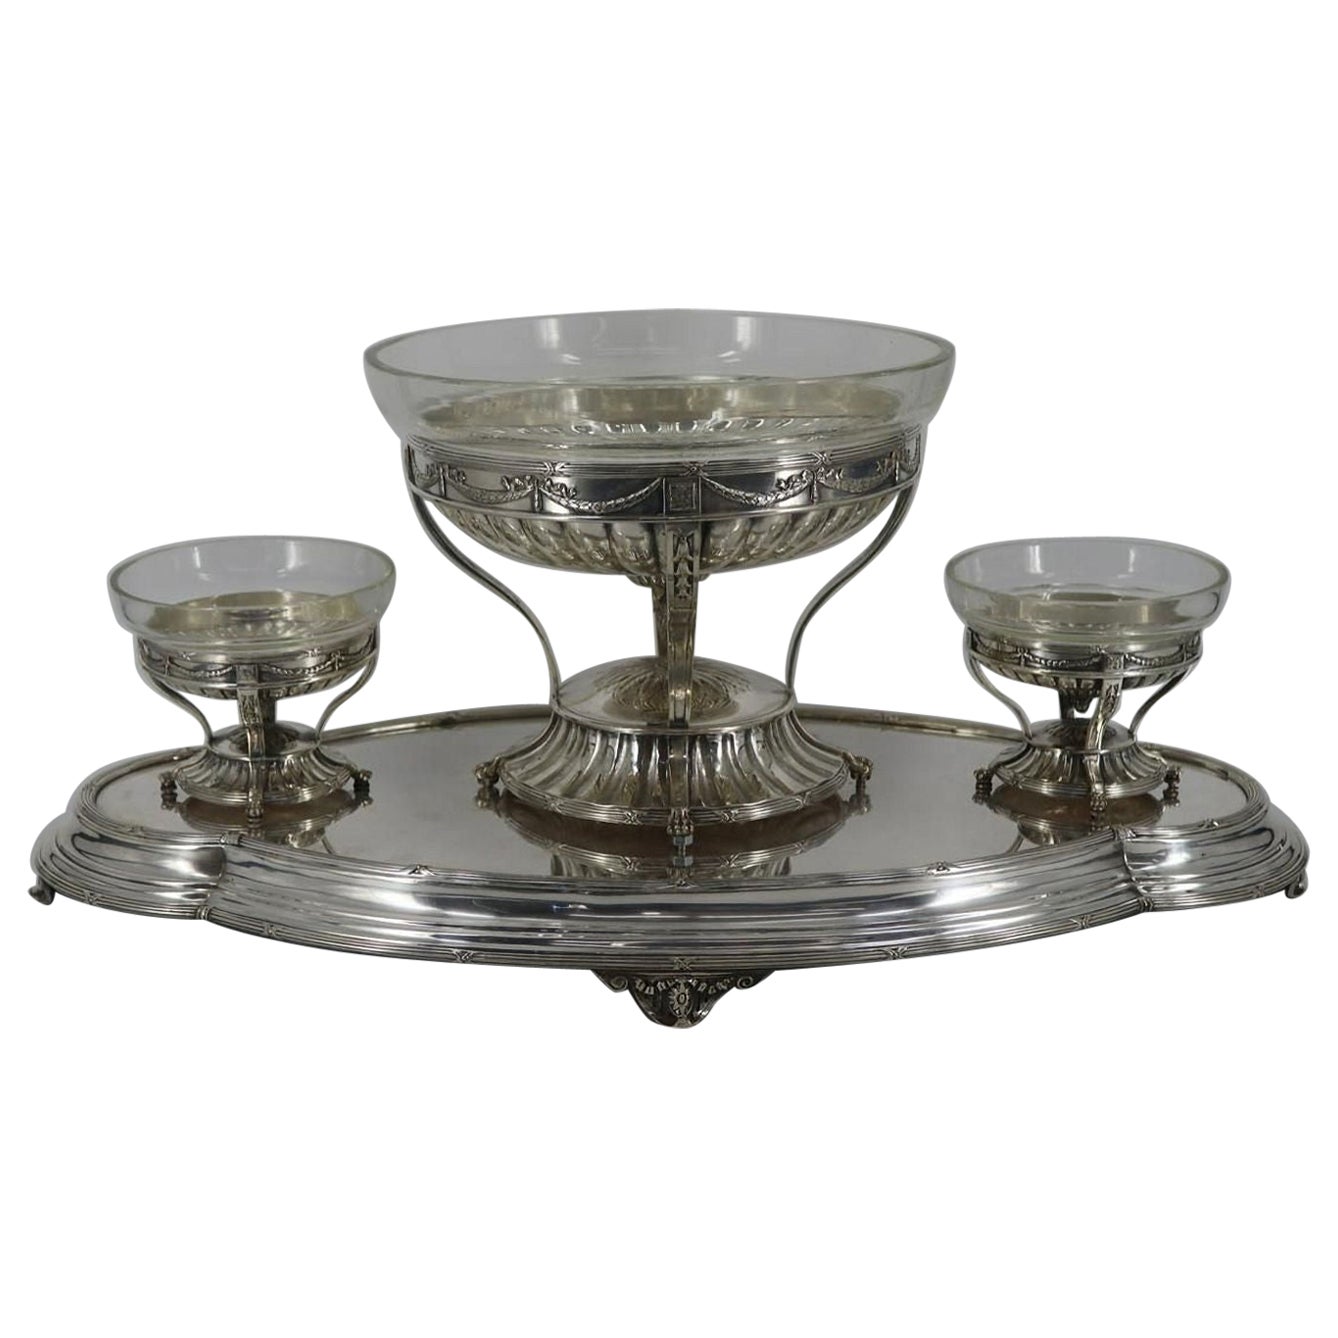 Elkington Silverplate and Glass Centerpiece For Sale